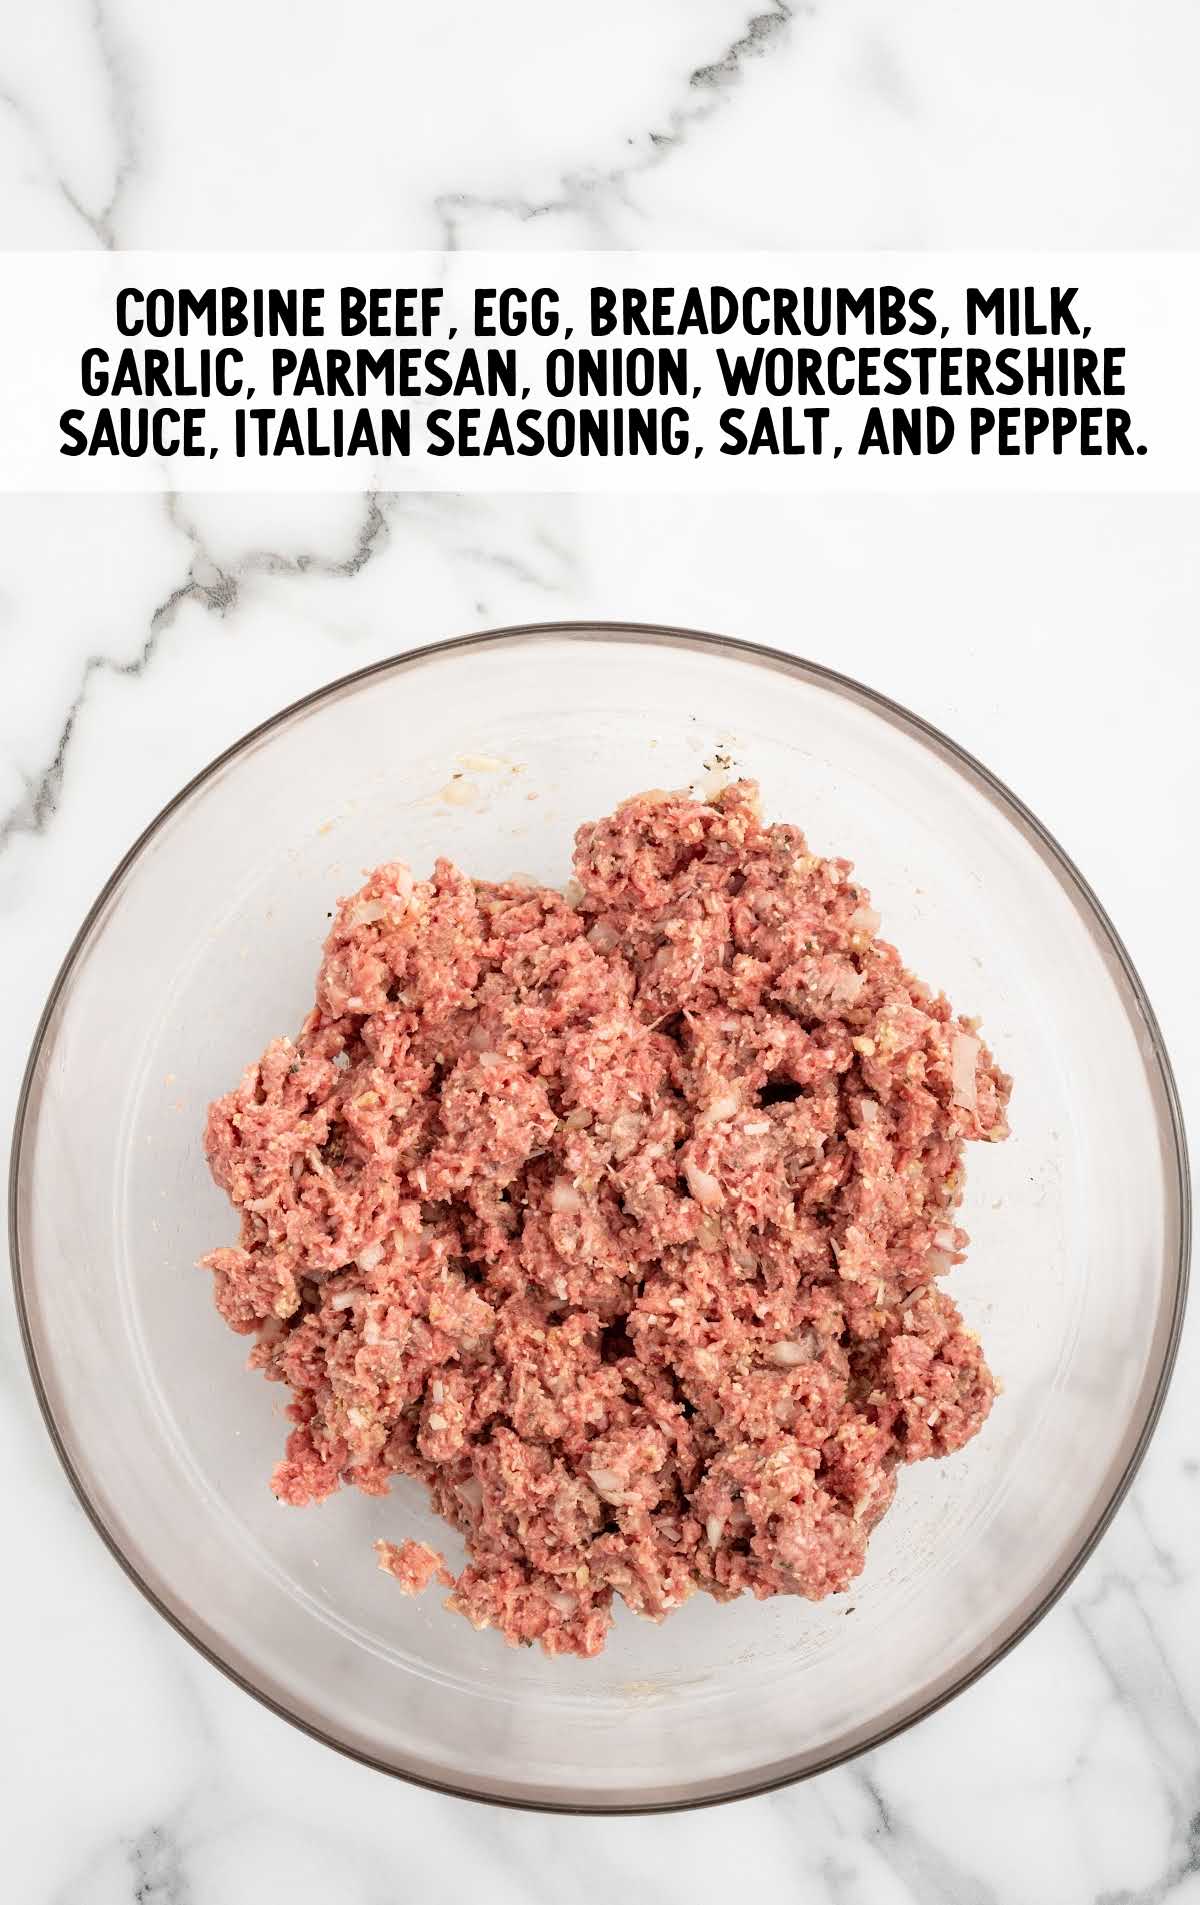 ground beef, egg, breadcrumbs, milk, garlic, parmesan cheese, onion, Worcestershire sauce, Italian seasoning, kosher salt, and cracked black pepper combined in a bowl